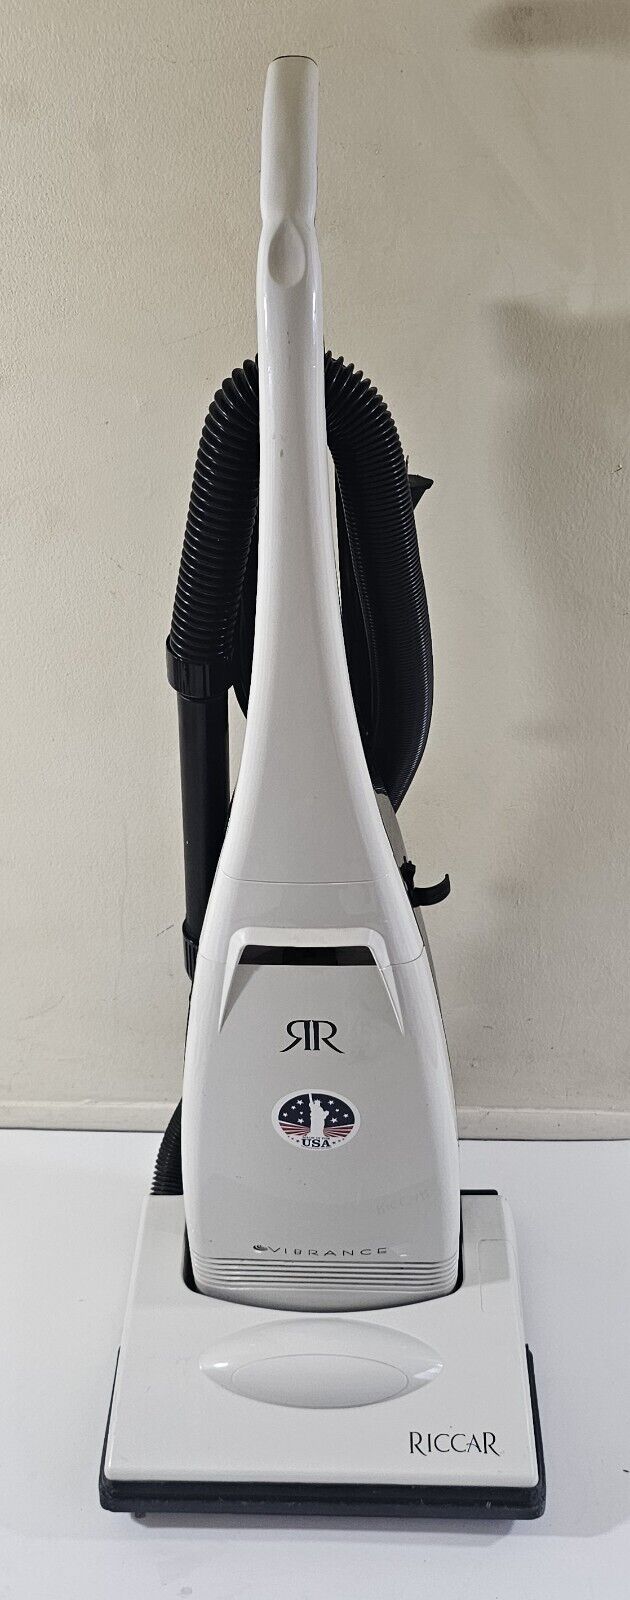 Riccar Vibrance R20E Upright Vacuum Cleaner - Tested - Read